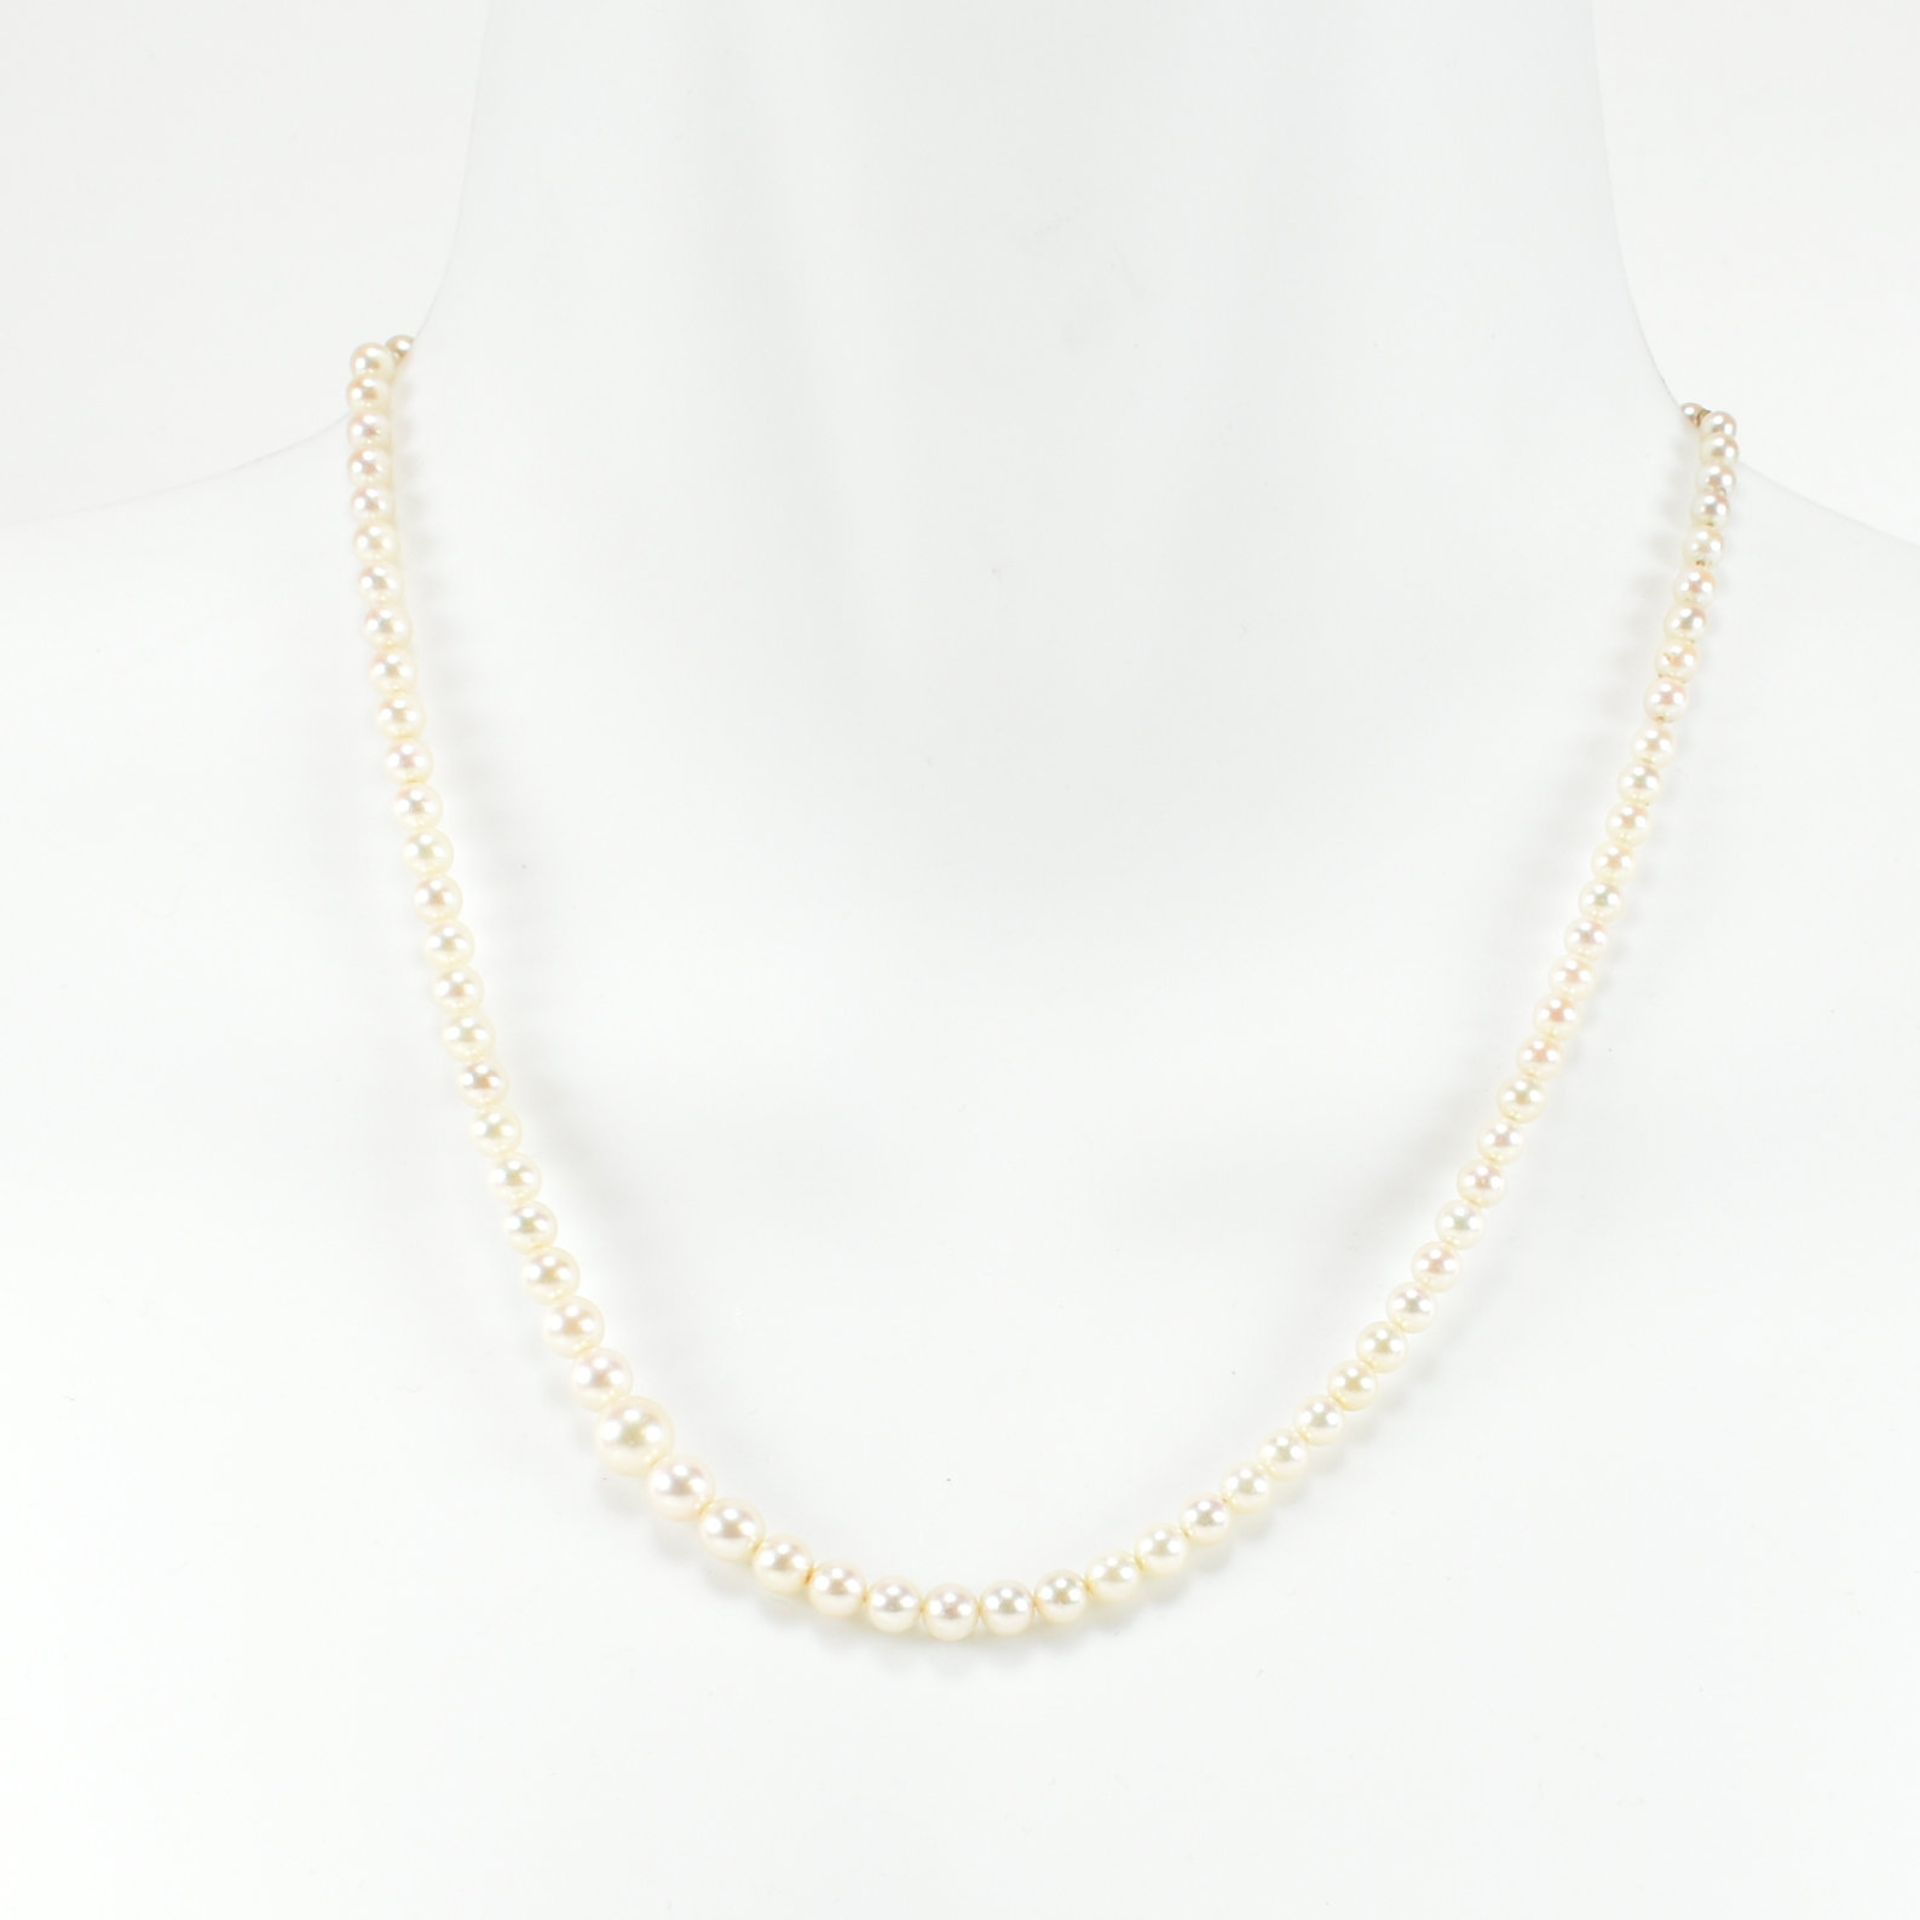 9CT WHITE GOLD & CULTURED PEARL NECKLACE - Image 5 of 5